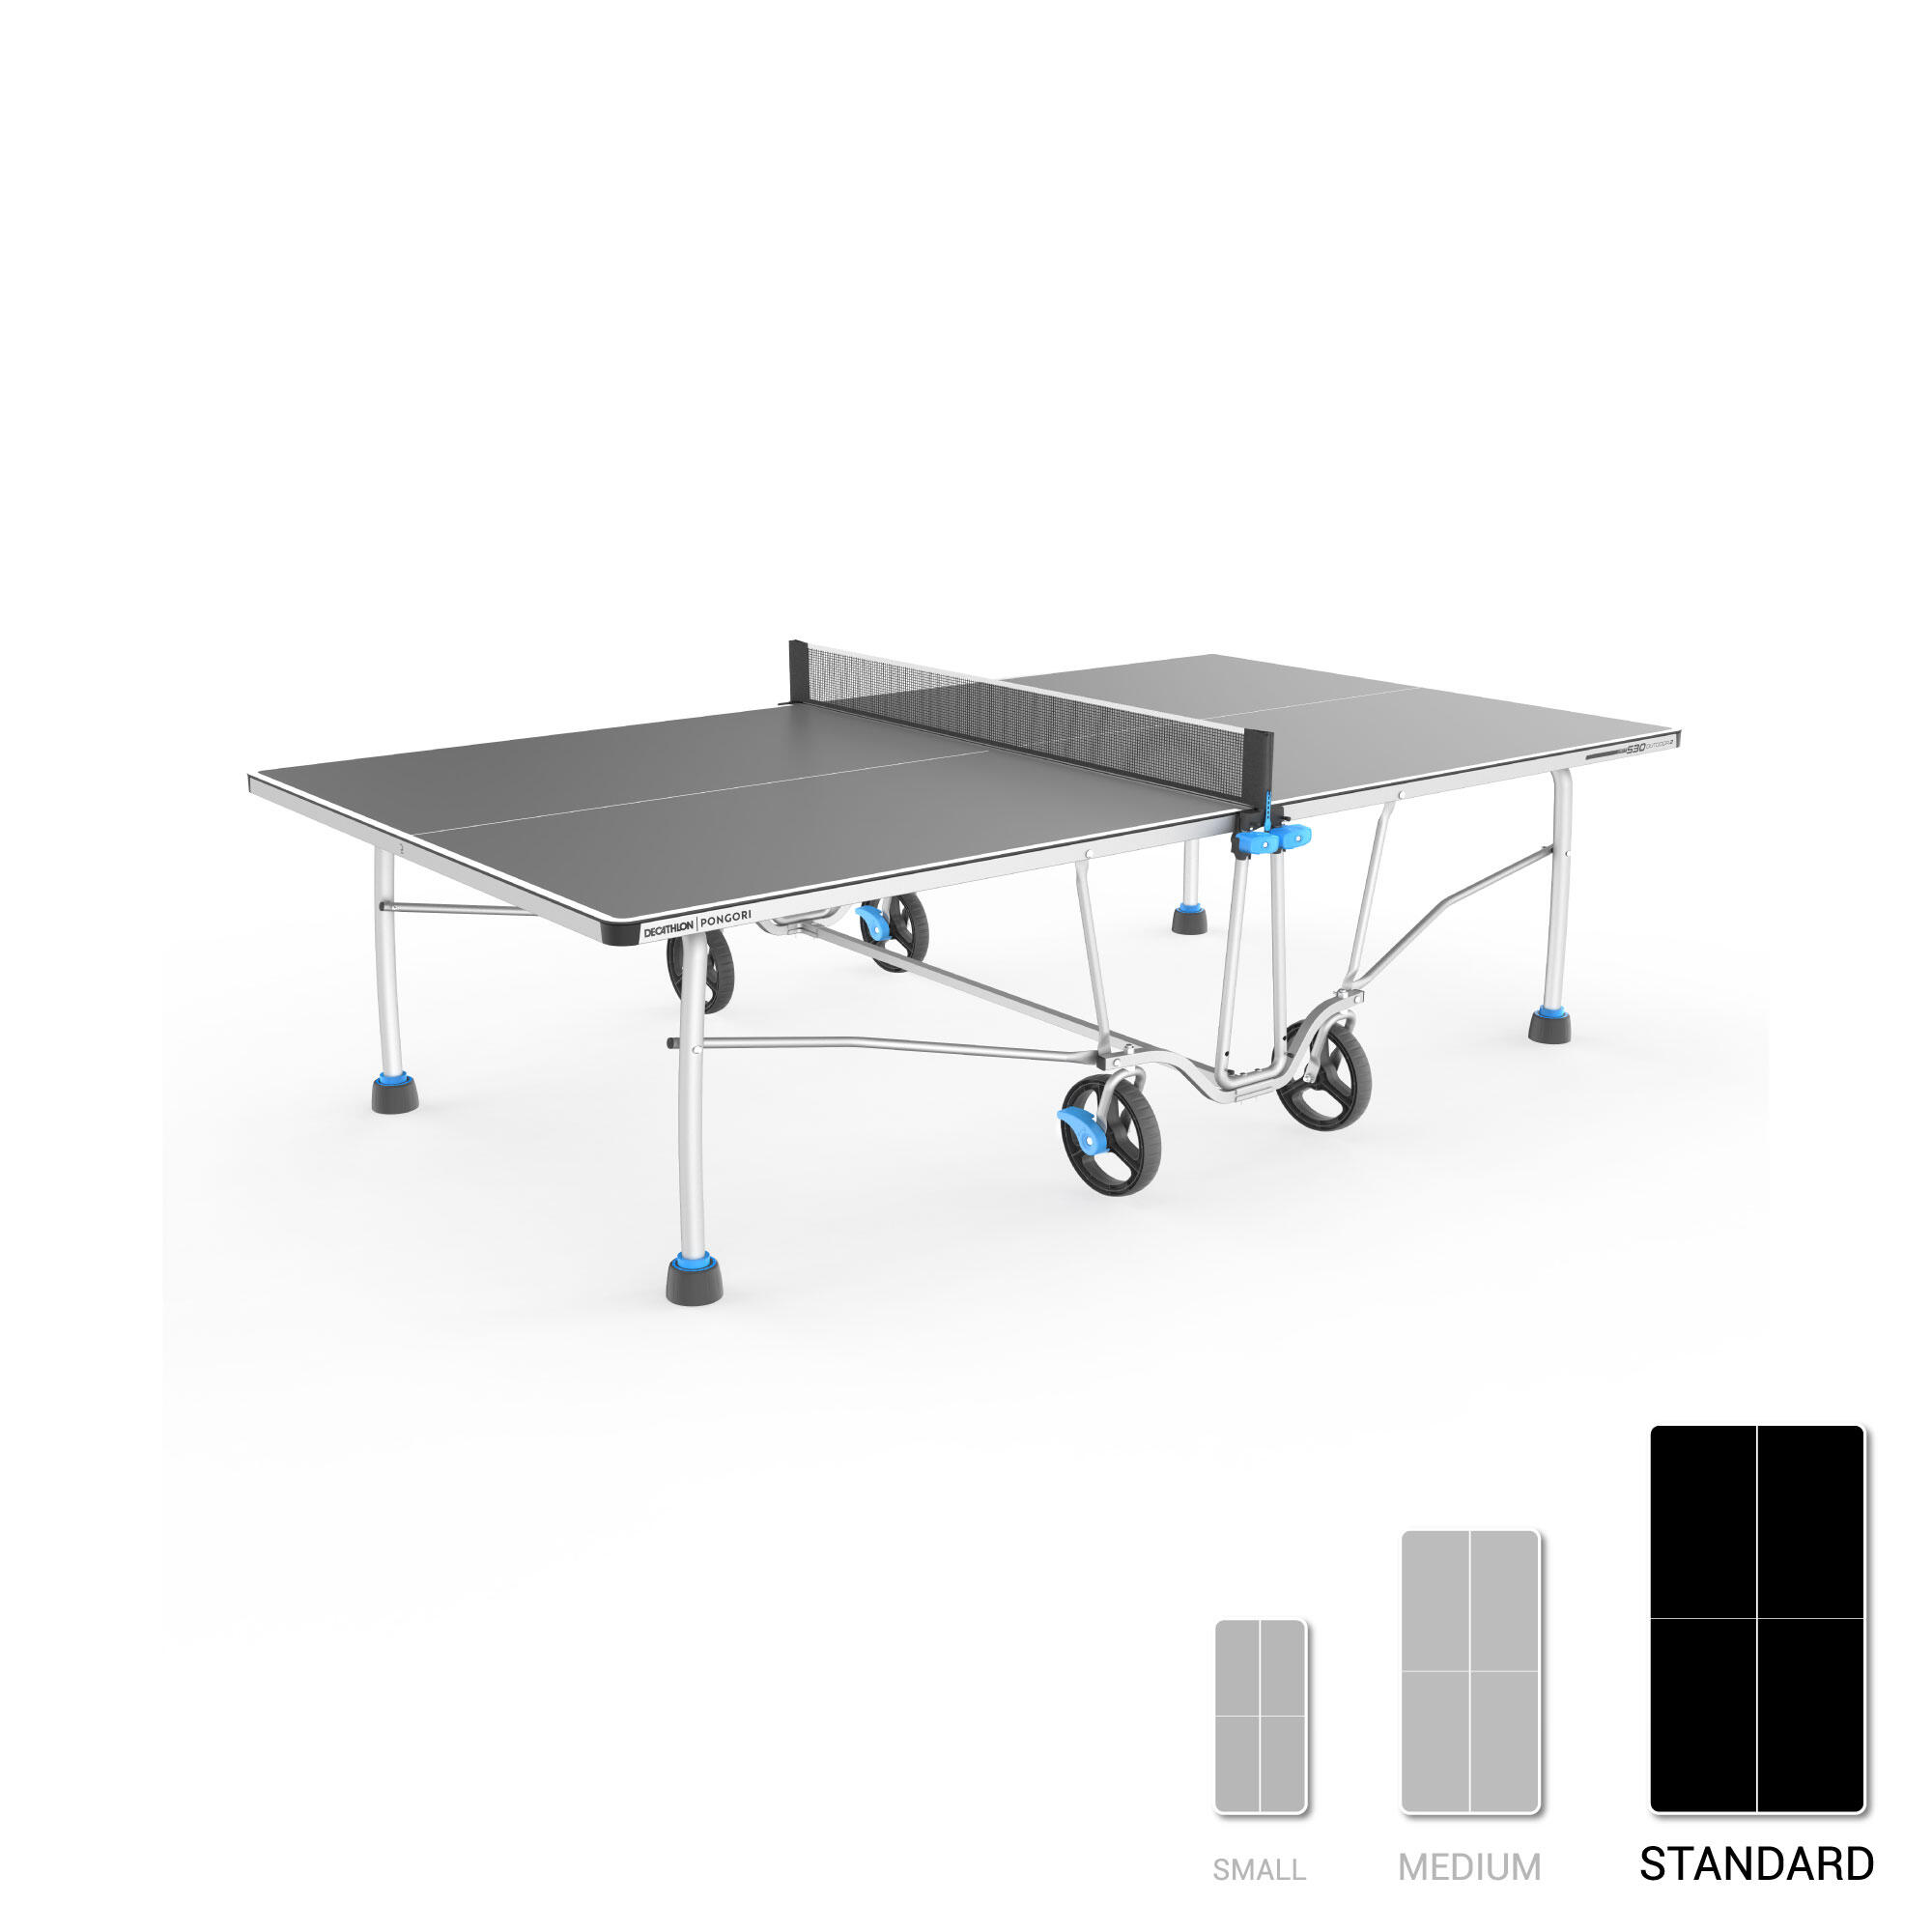 Outdoor Table Tennis Table PPT 530.2 - Grey 4/13